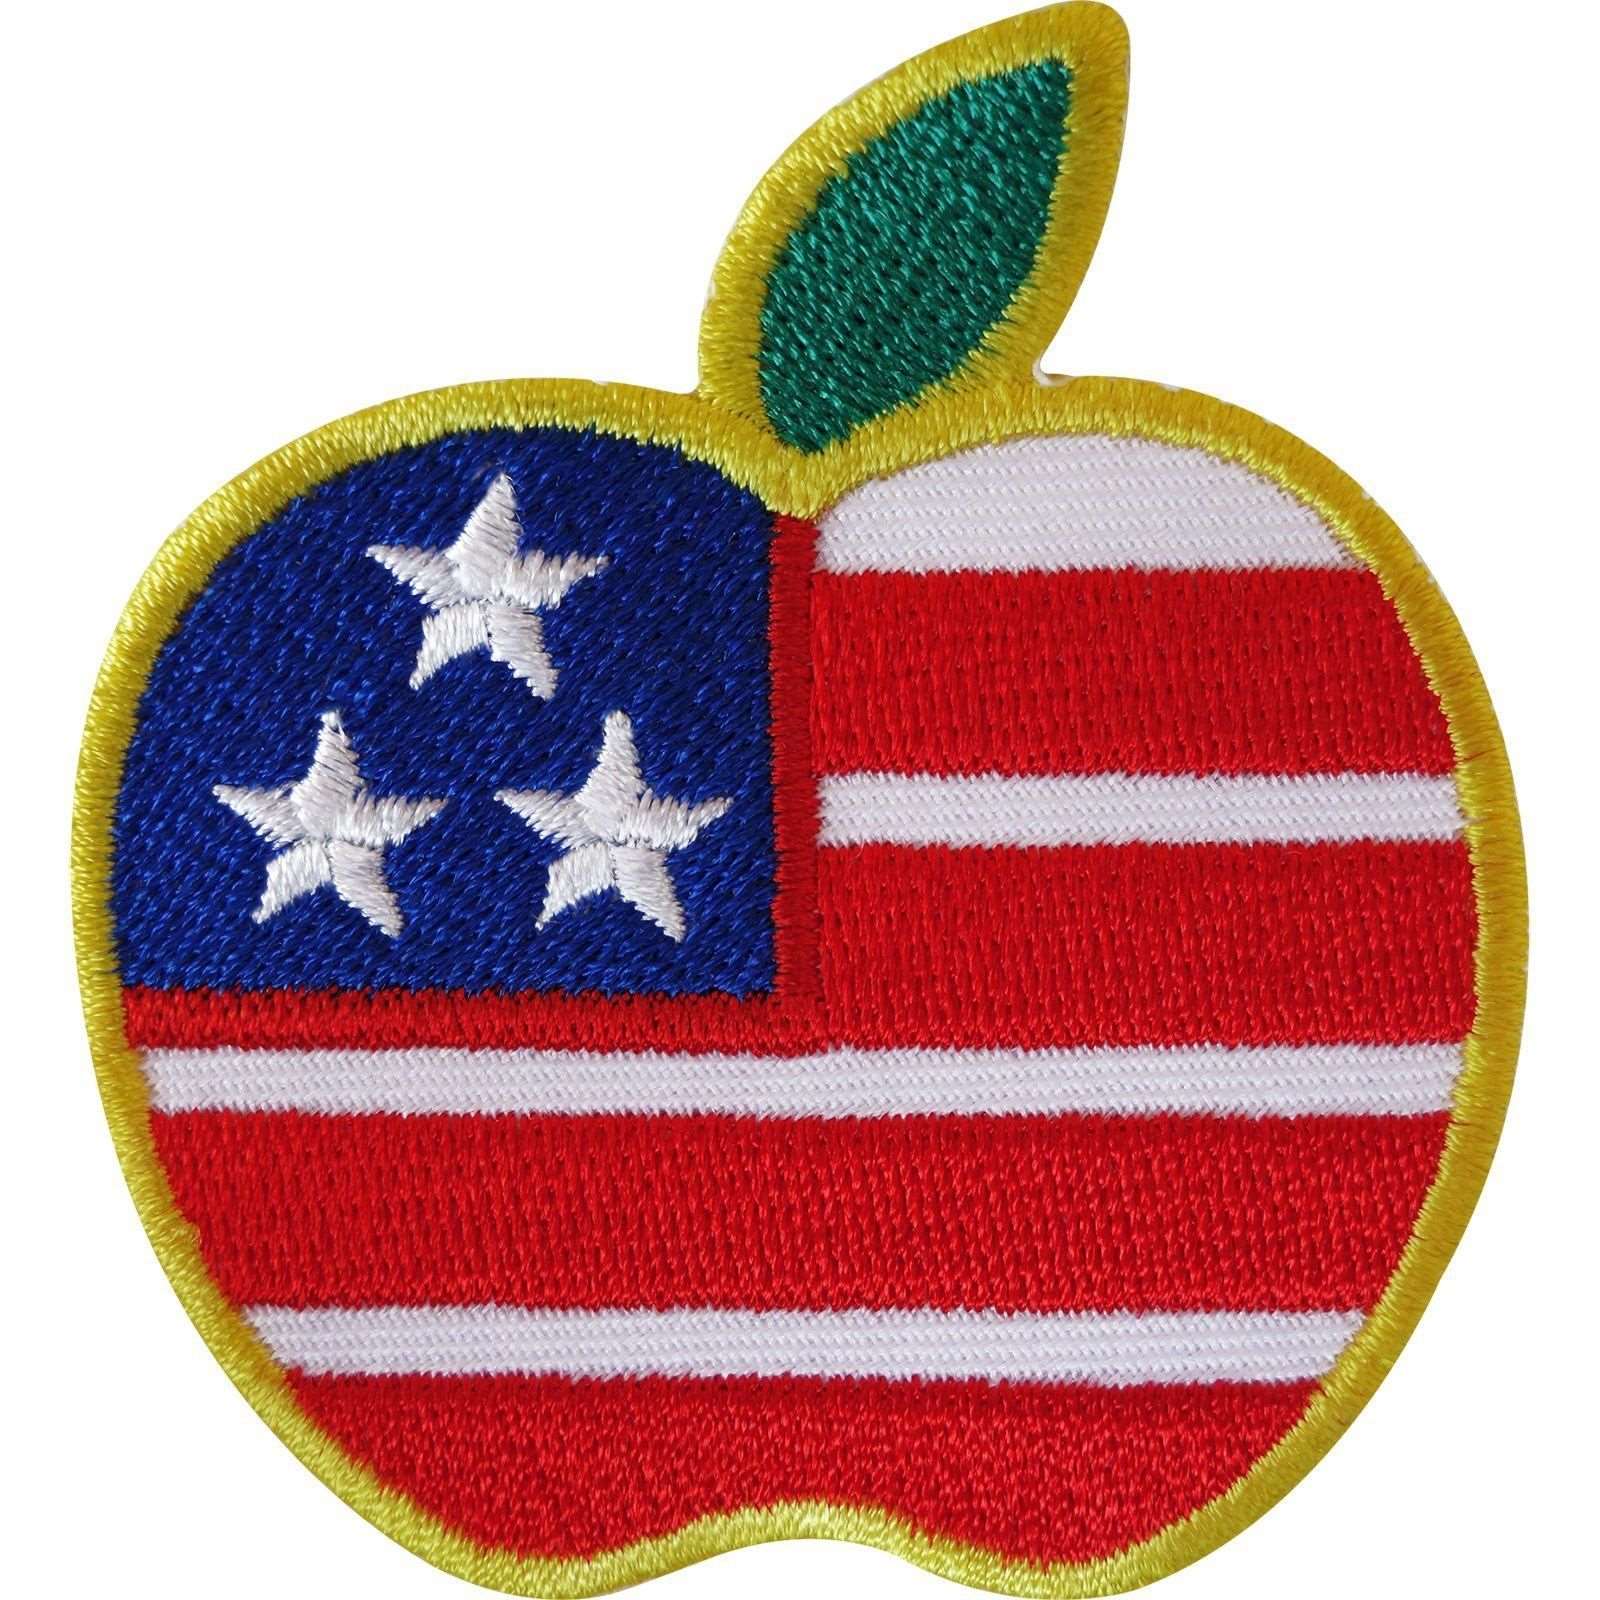 Big Apple Iron On Clothes Patch Embroidered Sew On Badge New York City USA Flag